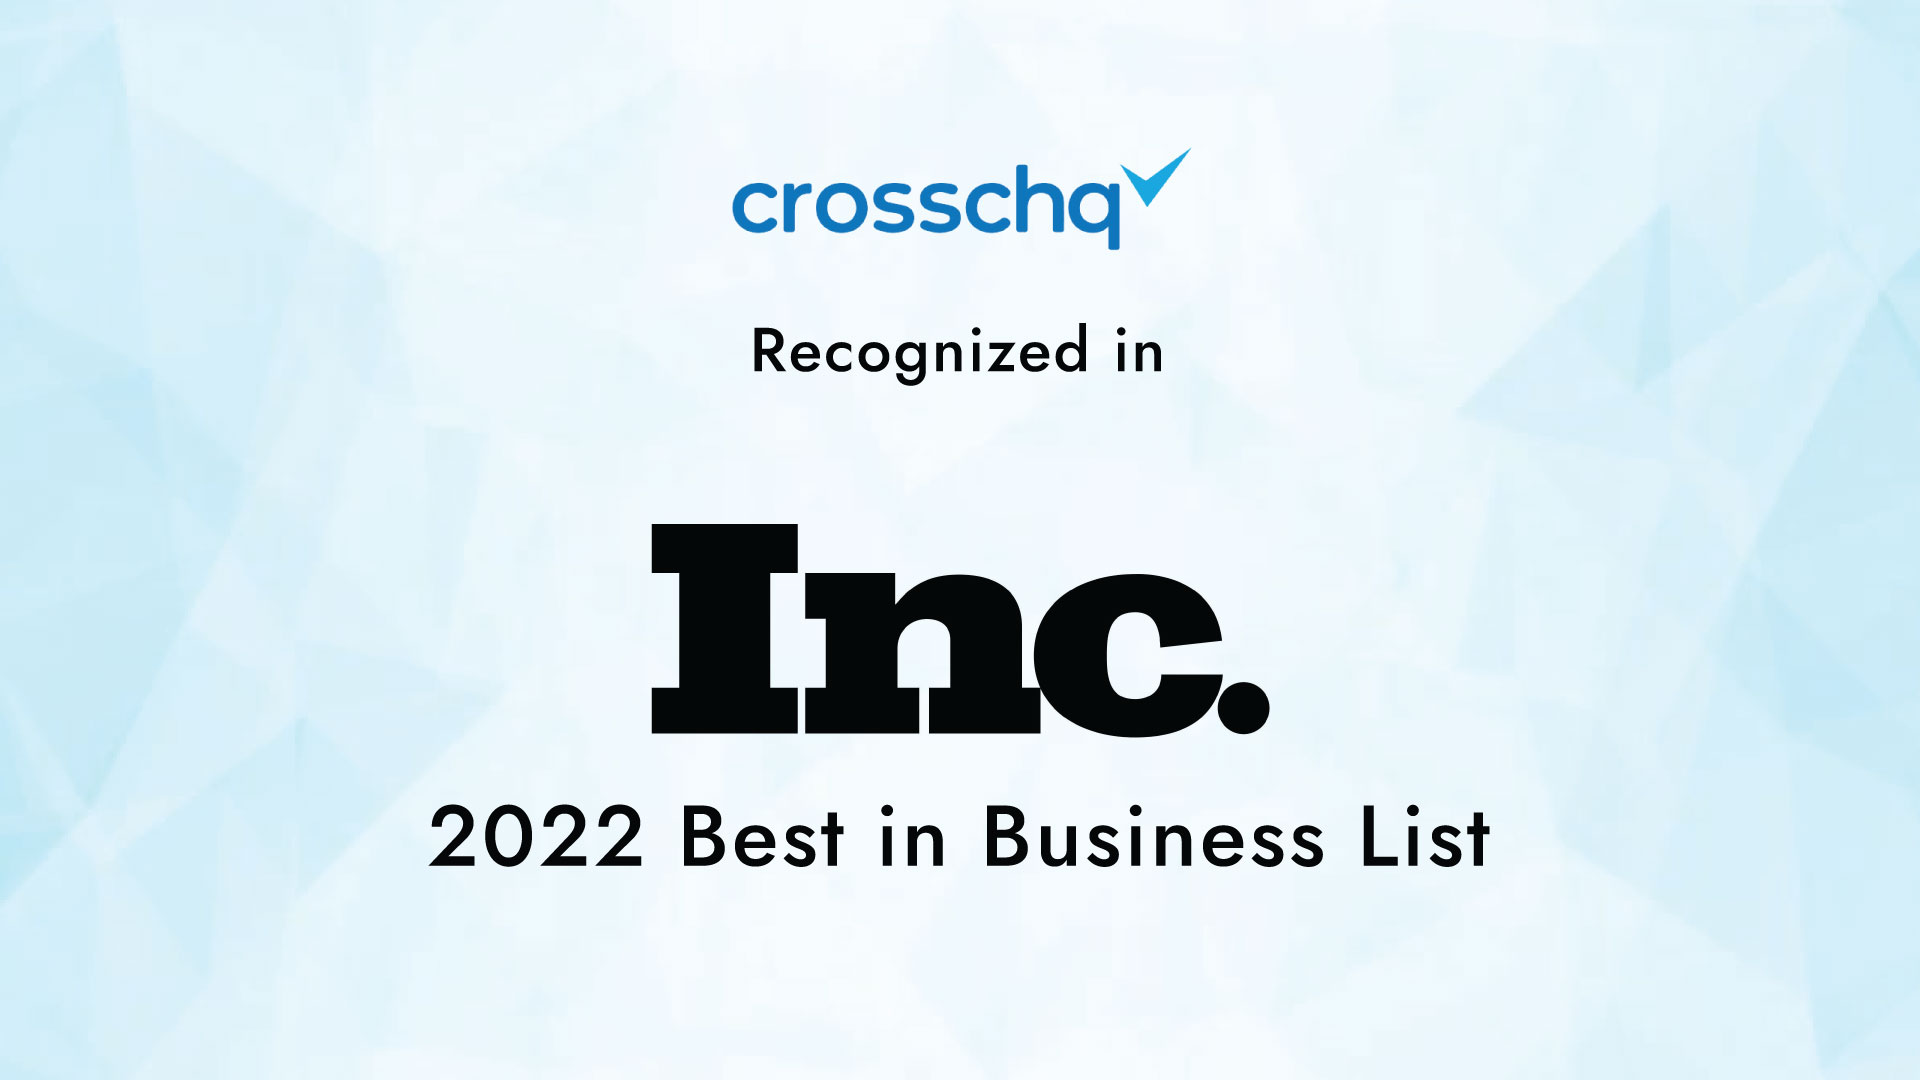 Crosschq Named to Inc.’s 2022 Best in Business List